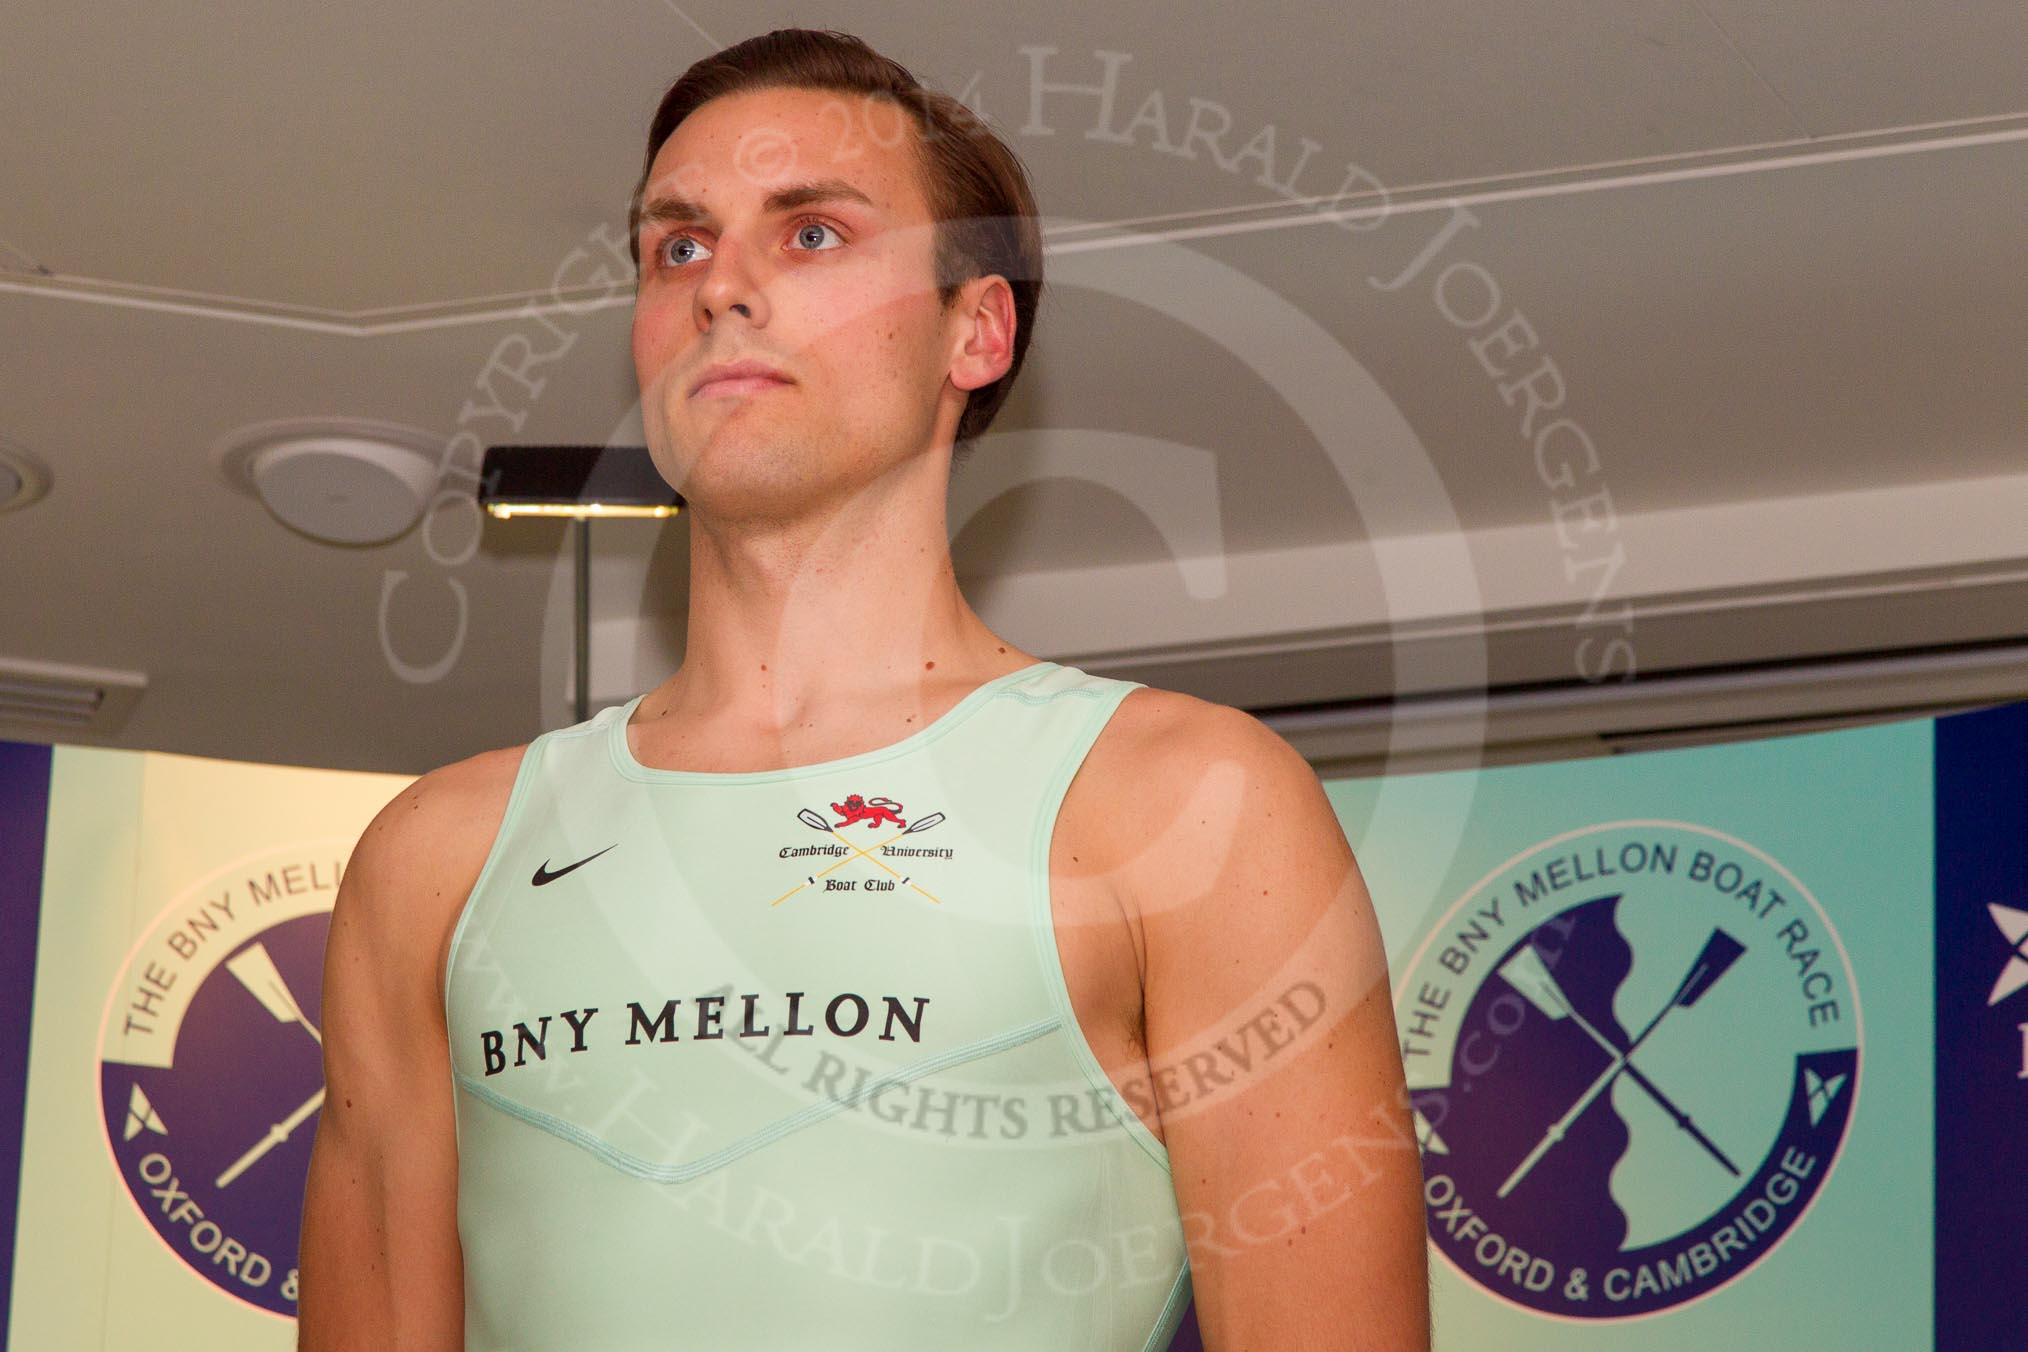 The Boat Race season 2014 - Crew Announcement and Weigh In: The 2014 Boat Race crews: Cambridge 6 seat Matthew Jackson - 94.4kg..
BNY Mellon Centre,
London EC4V 4LA,
London,
United Kingdom,
on 10 March 2014 at 12:03, image #101